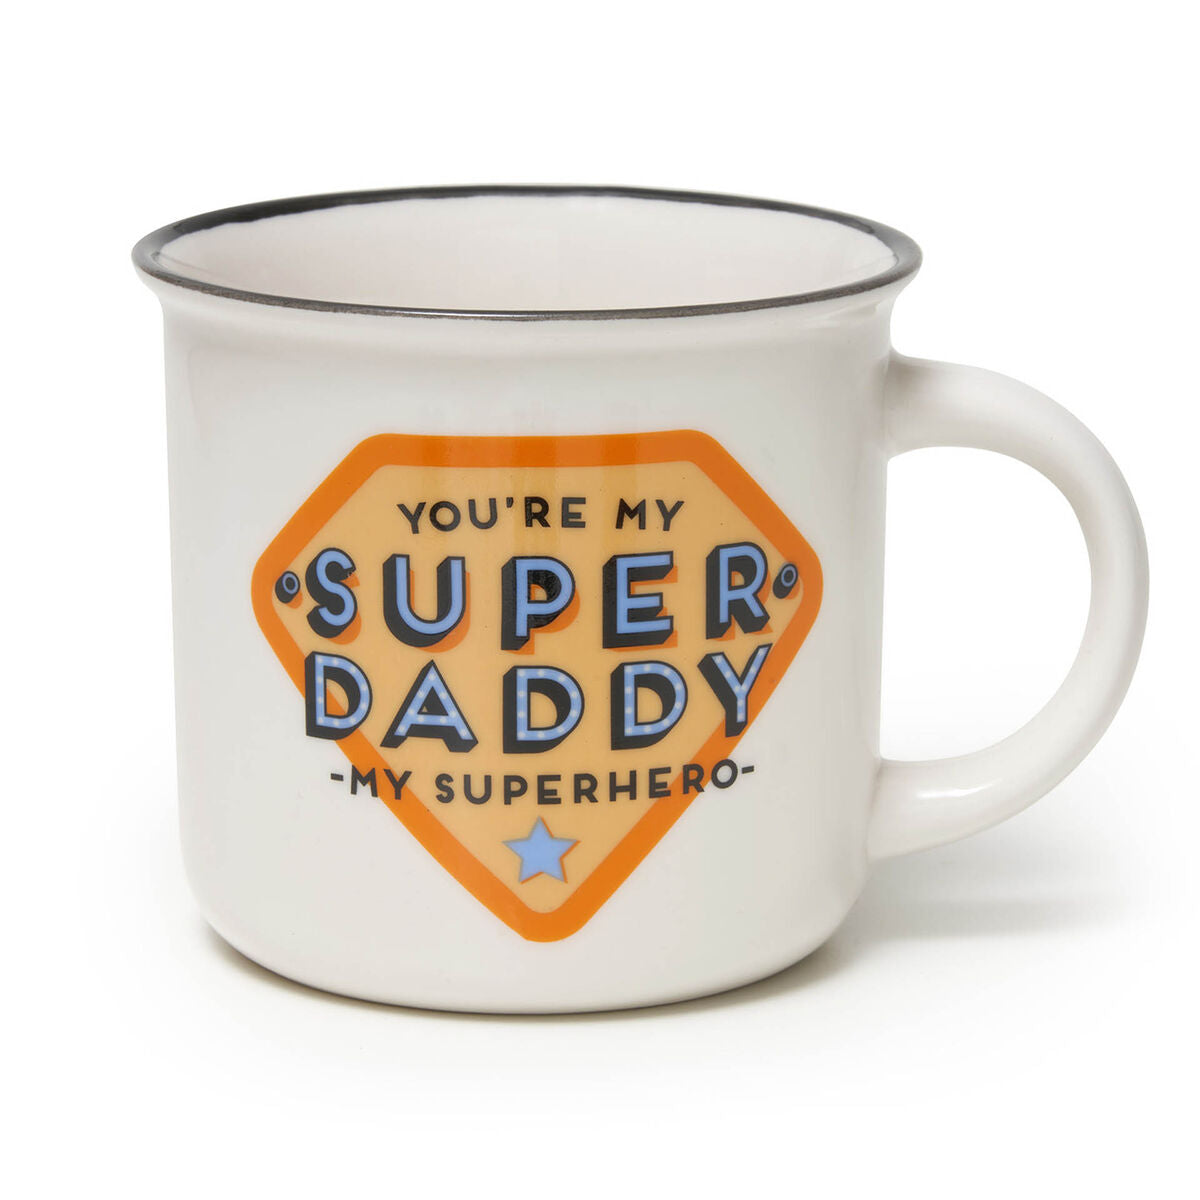 Fab Gifts | Legami Cup-Puccino - Super Daddy by Weirs of Baggot Street